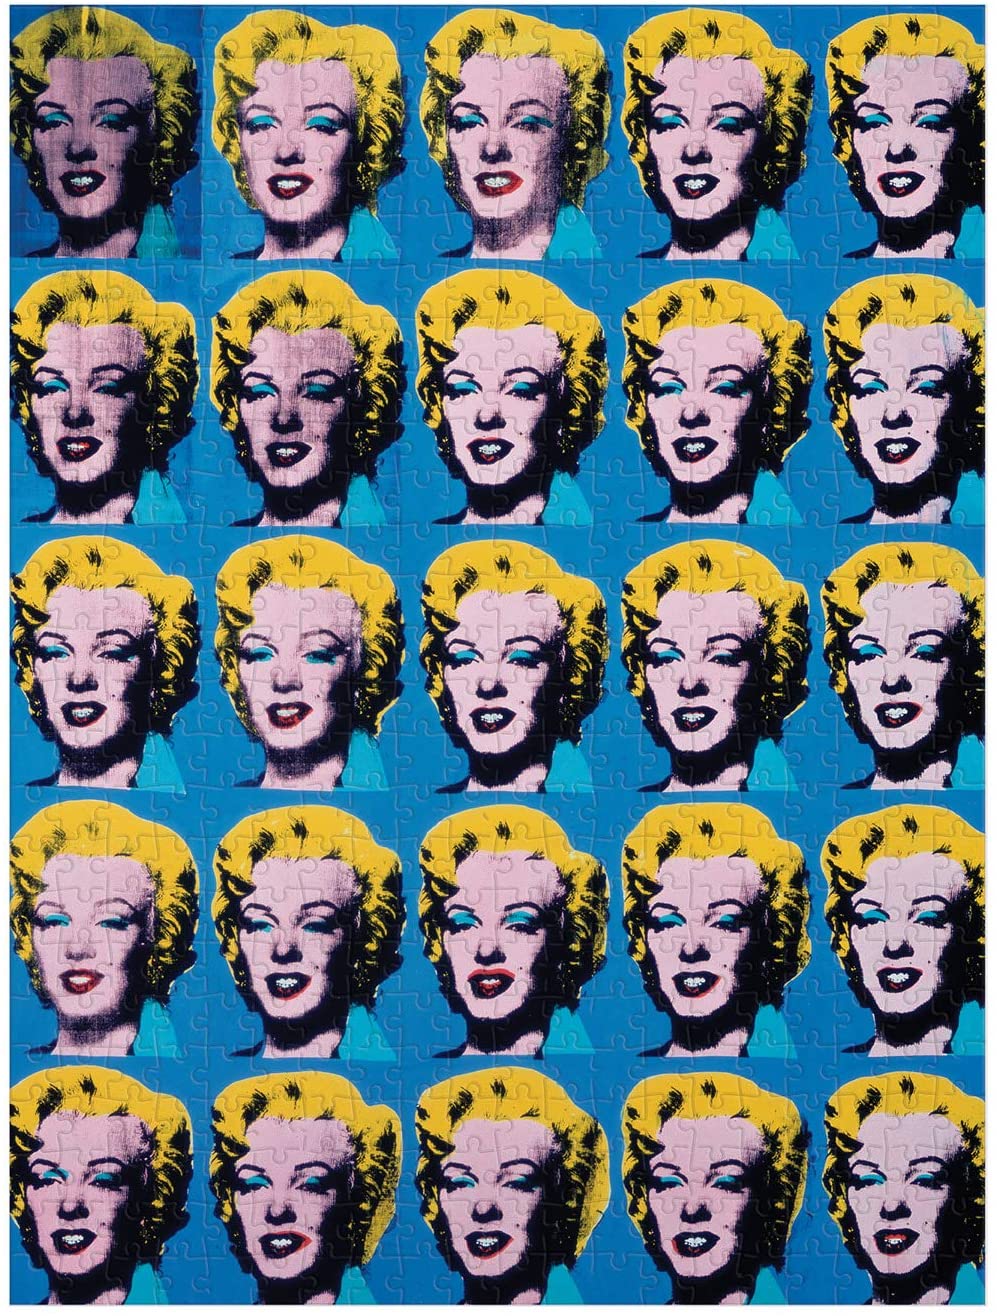 Andy Warhol: Marilyn Monroe 2-Sided 500 Piece Puzzle